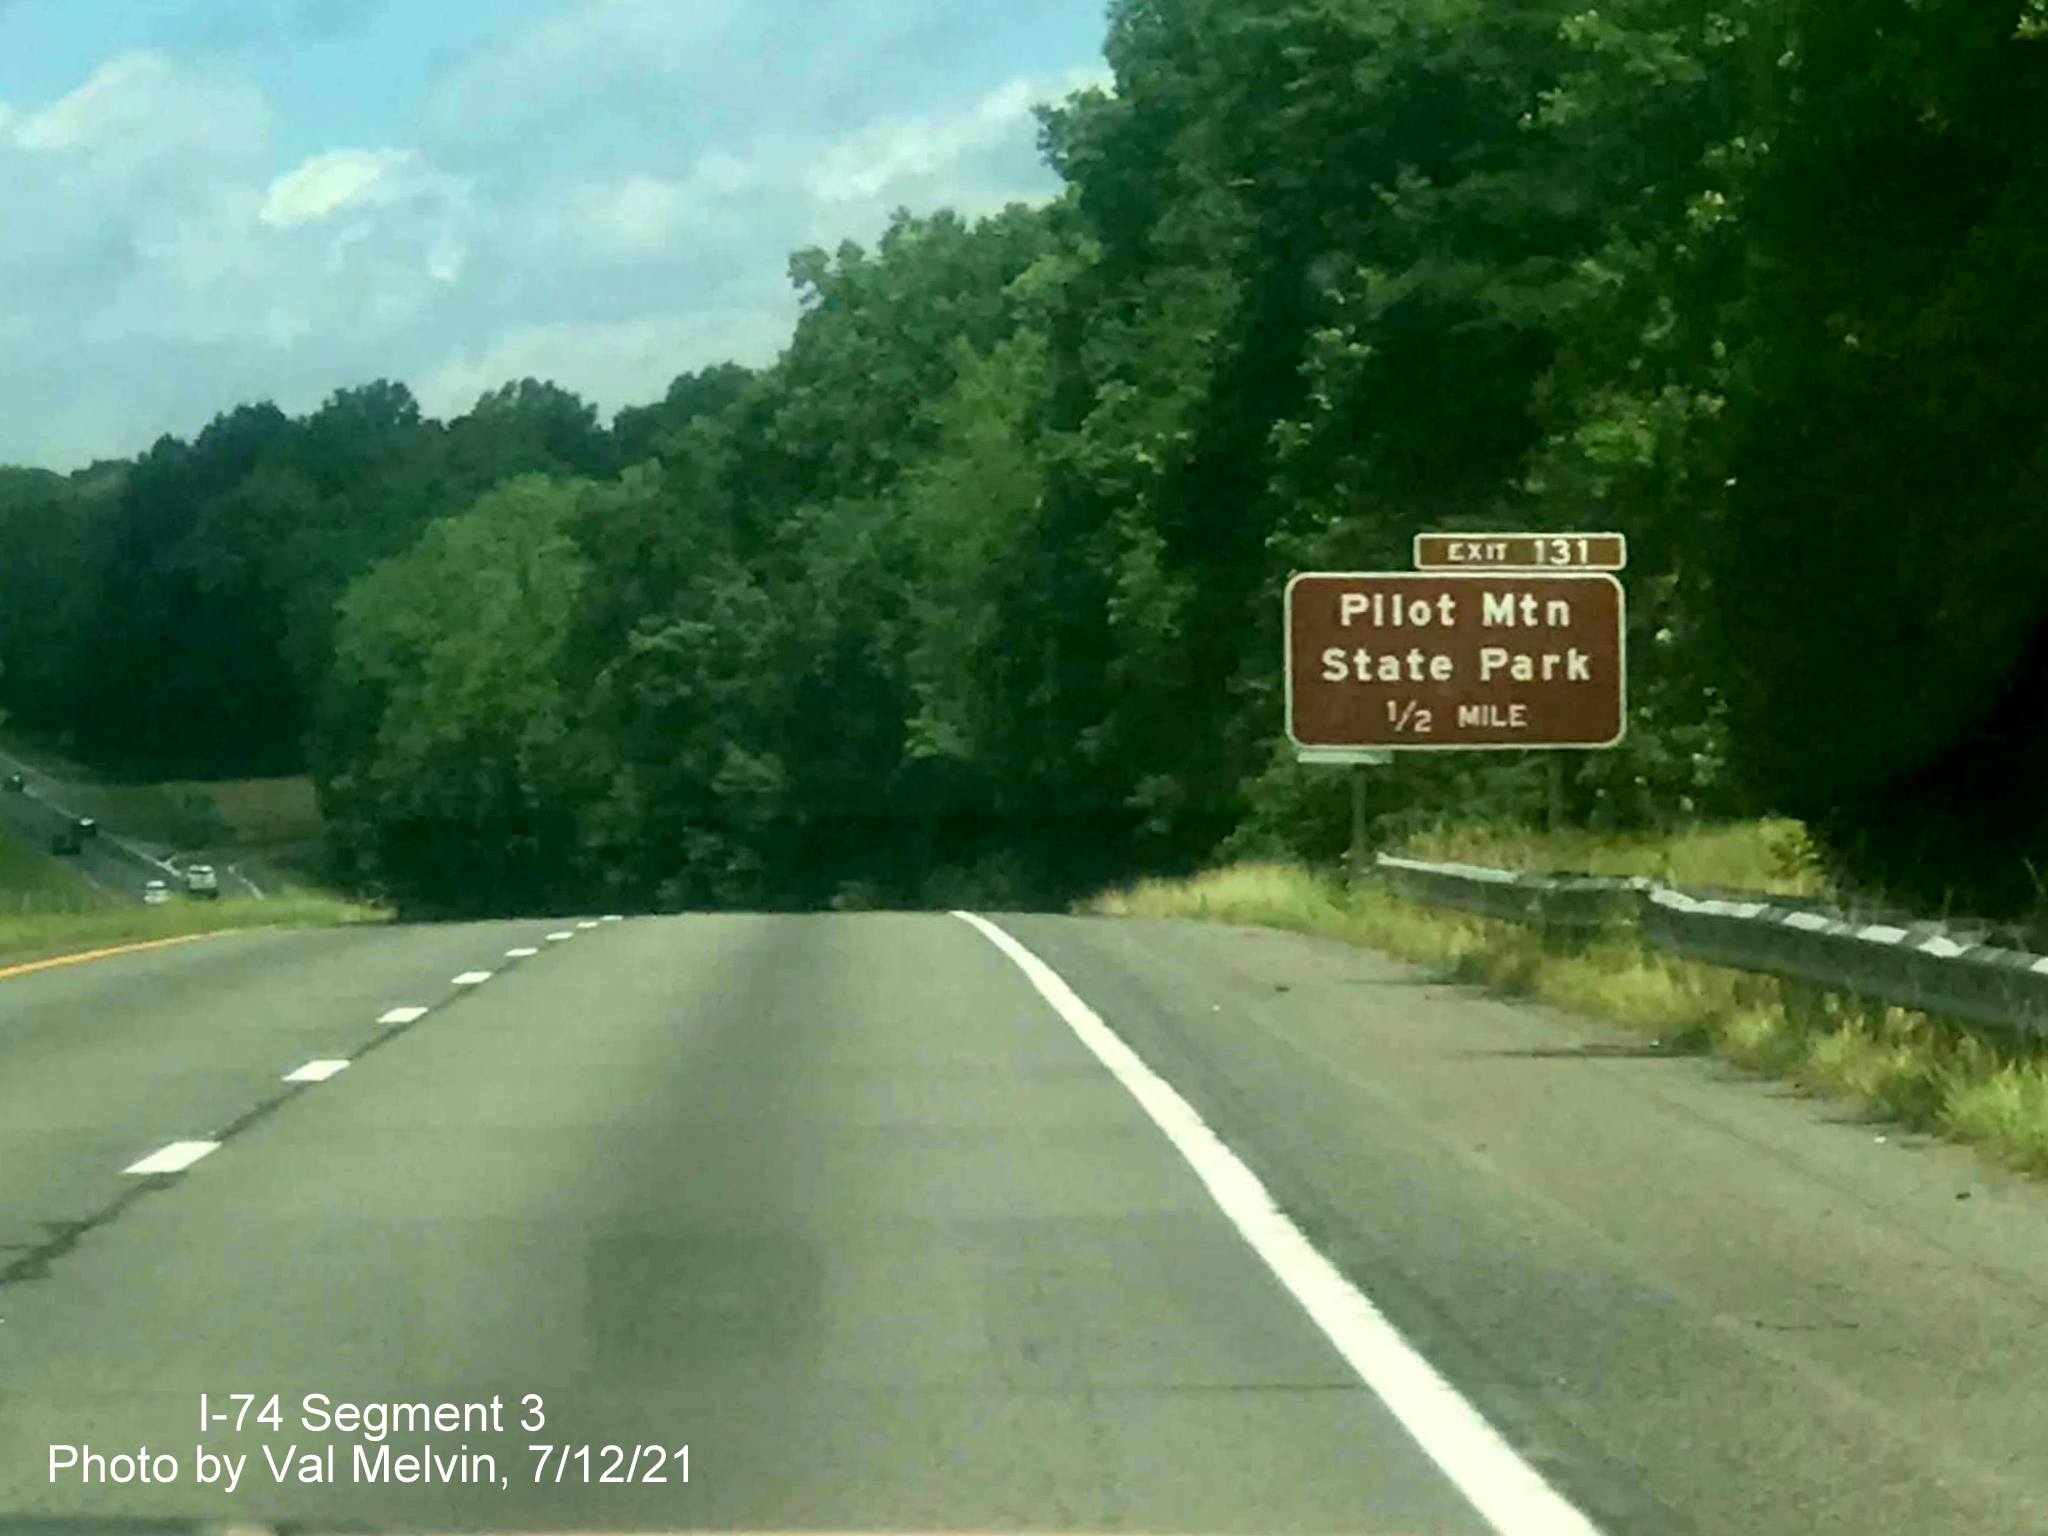 Image of 1/2 Mile advance sign for Pilot Mountain State Park exit on US 52 North (Future I-74 West) in Surry County, by Val Melvin, July 2021